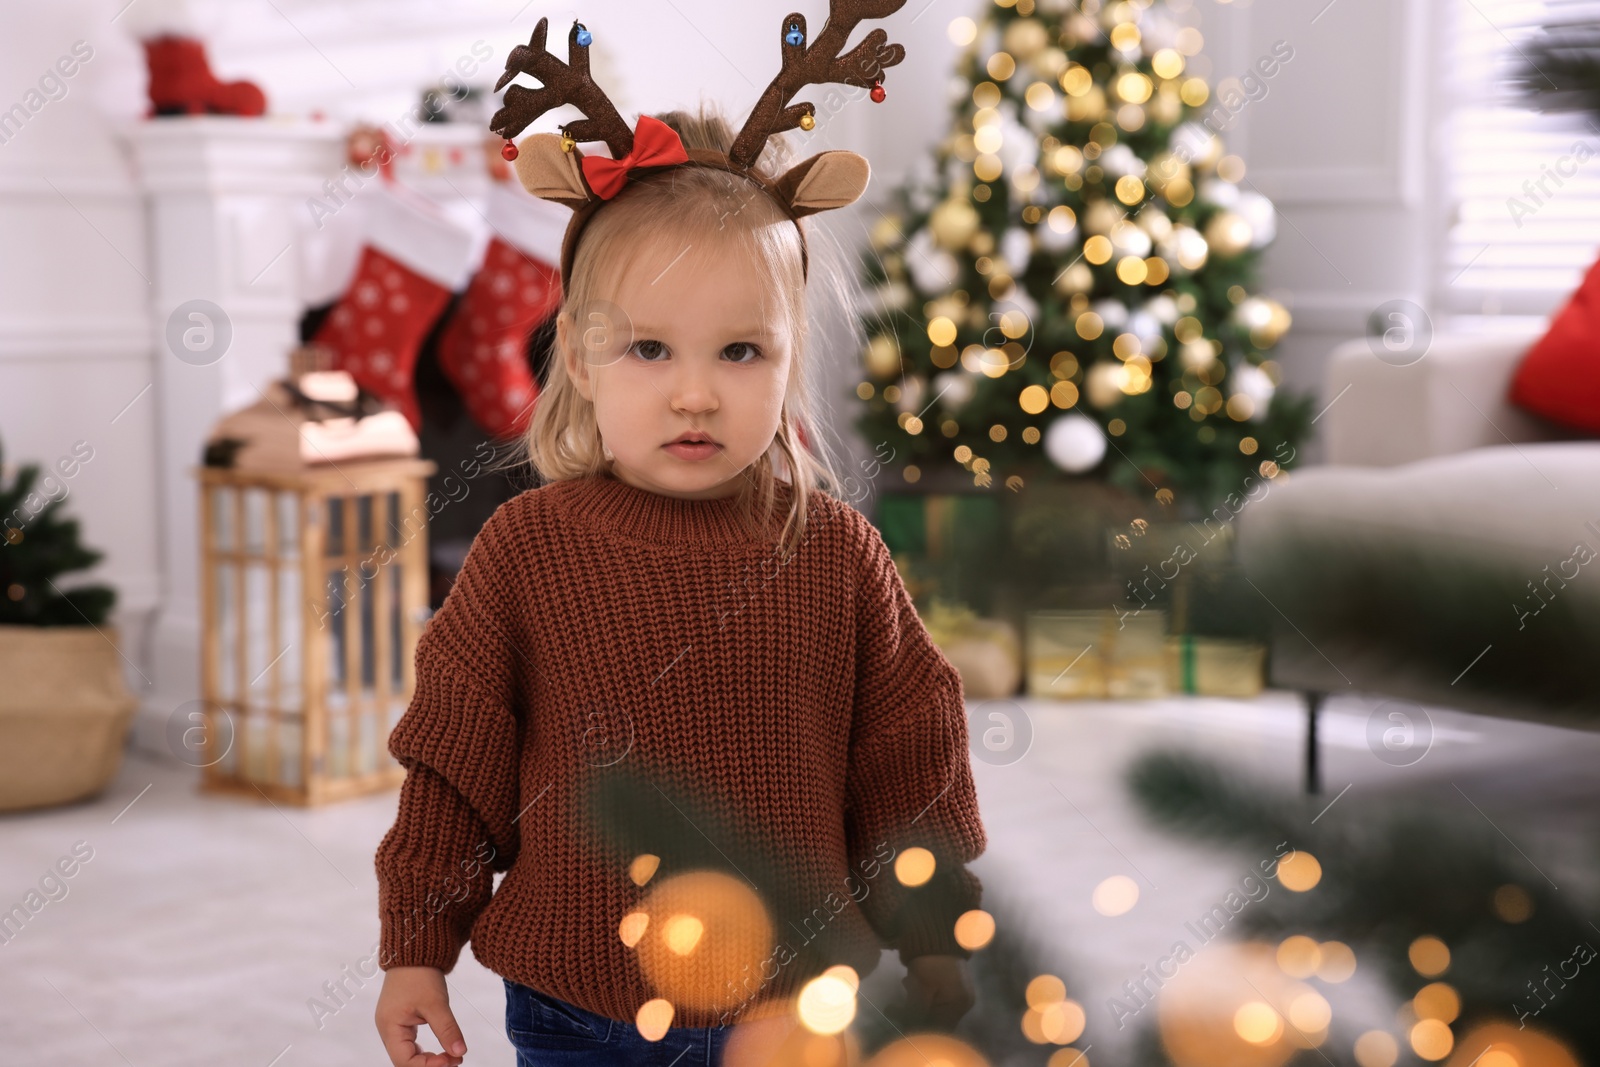 Photo of Cute little girl wearing deer headband in room decorated for Christmas